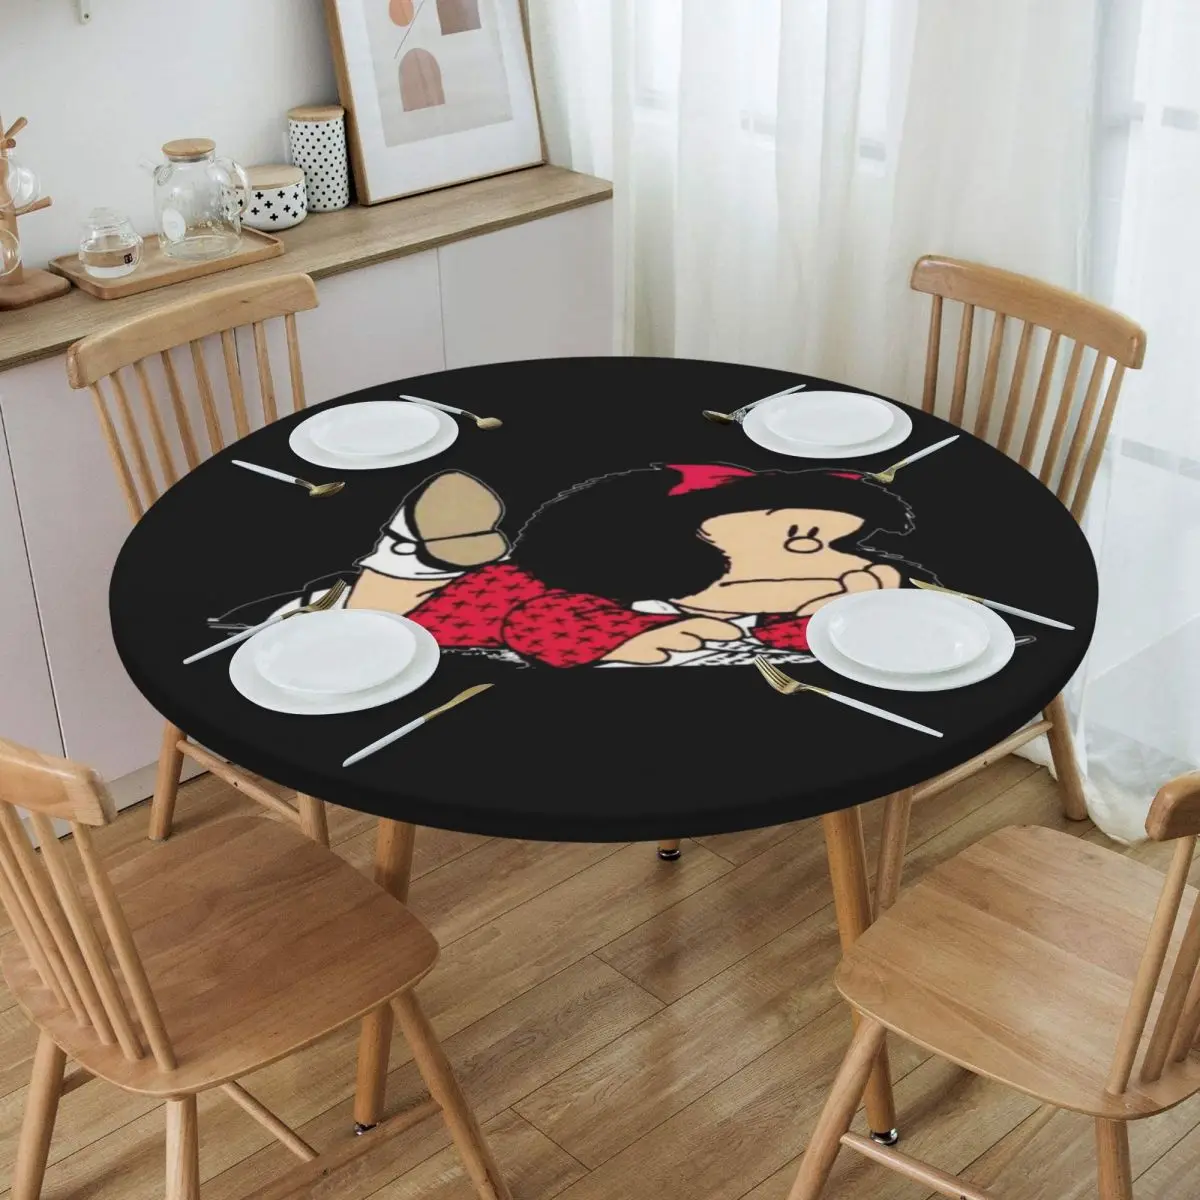 

Round Oilproof Cute Mafalda Table Cover Fitted Argentine Cartoon Quino Comic Table Cloth Backing Edge Tablecloth for Dining